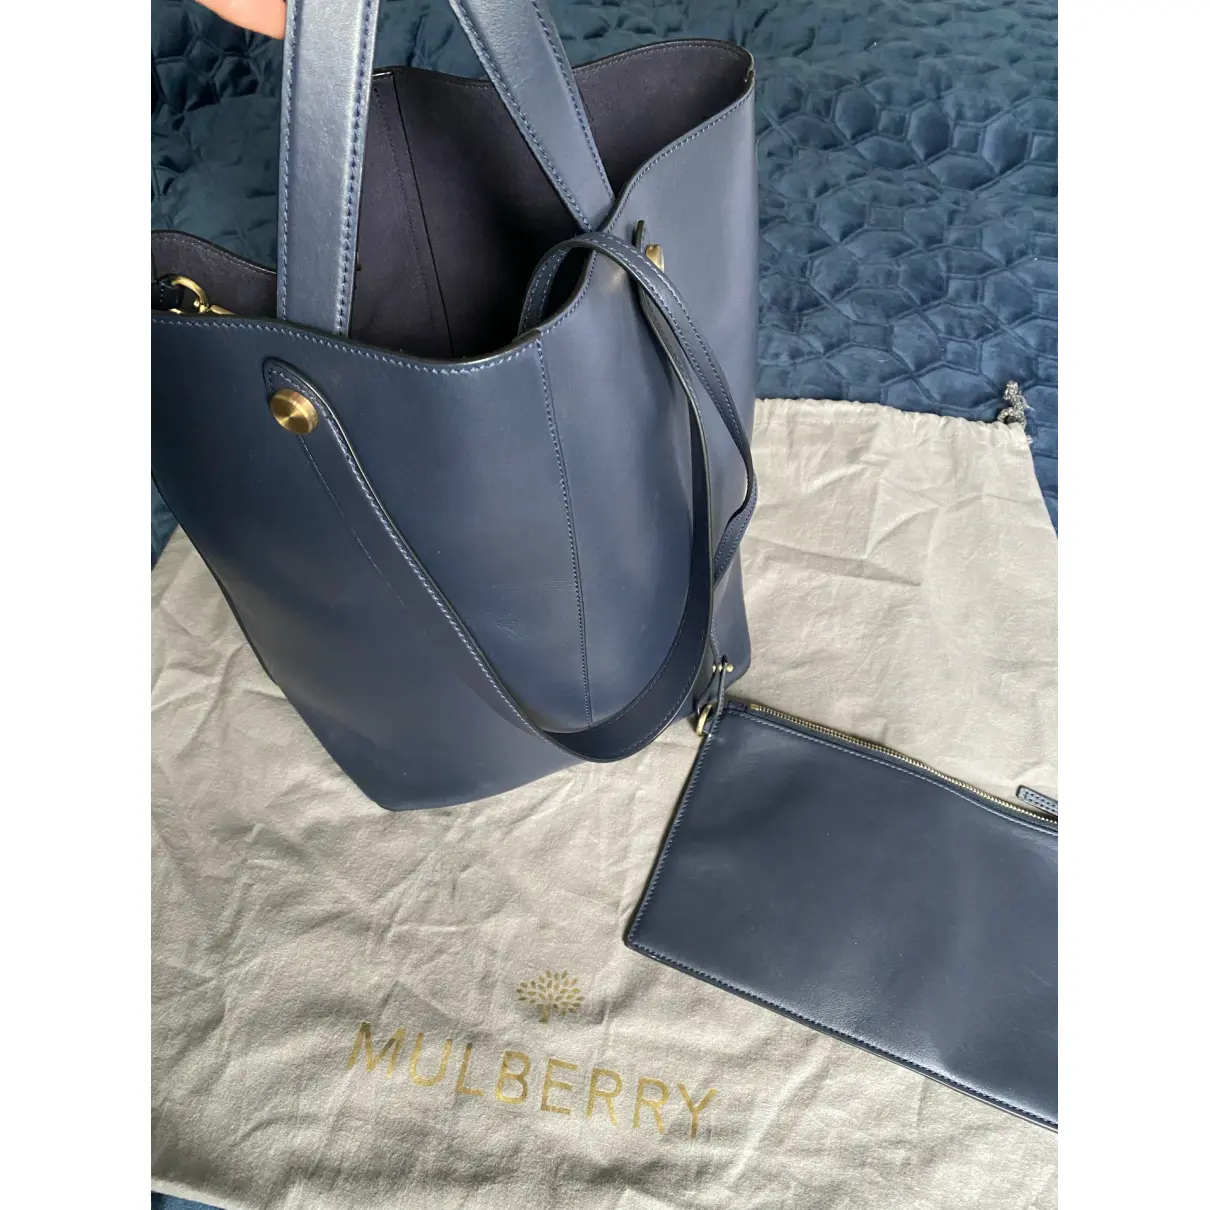 Buy Mulberry Kite leather tote online